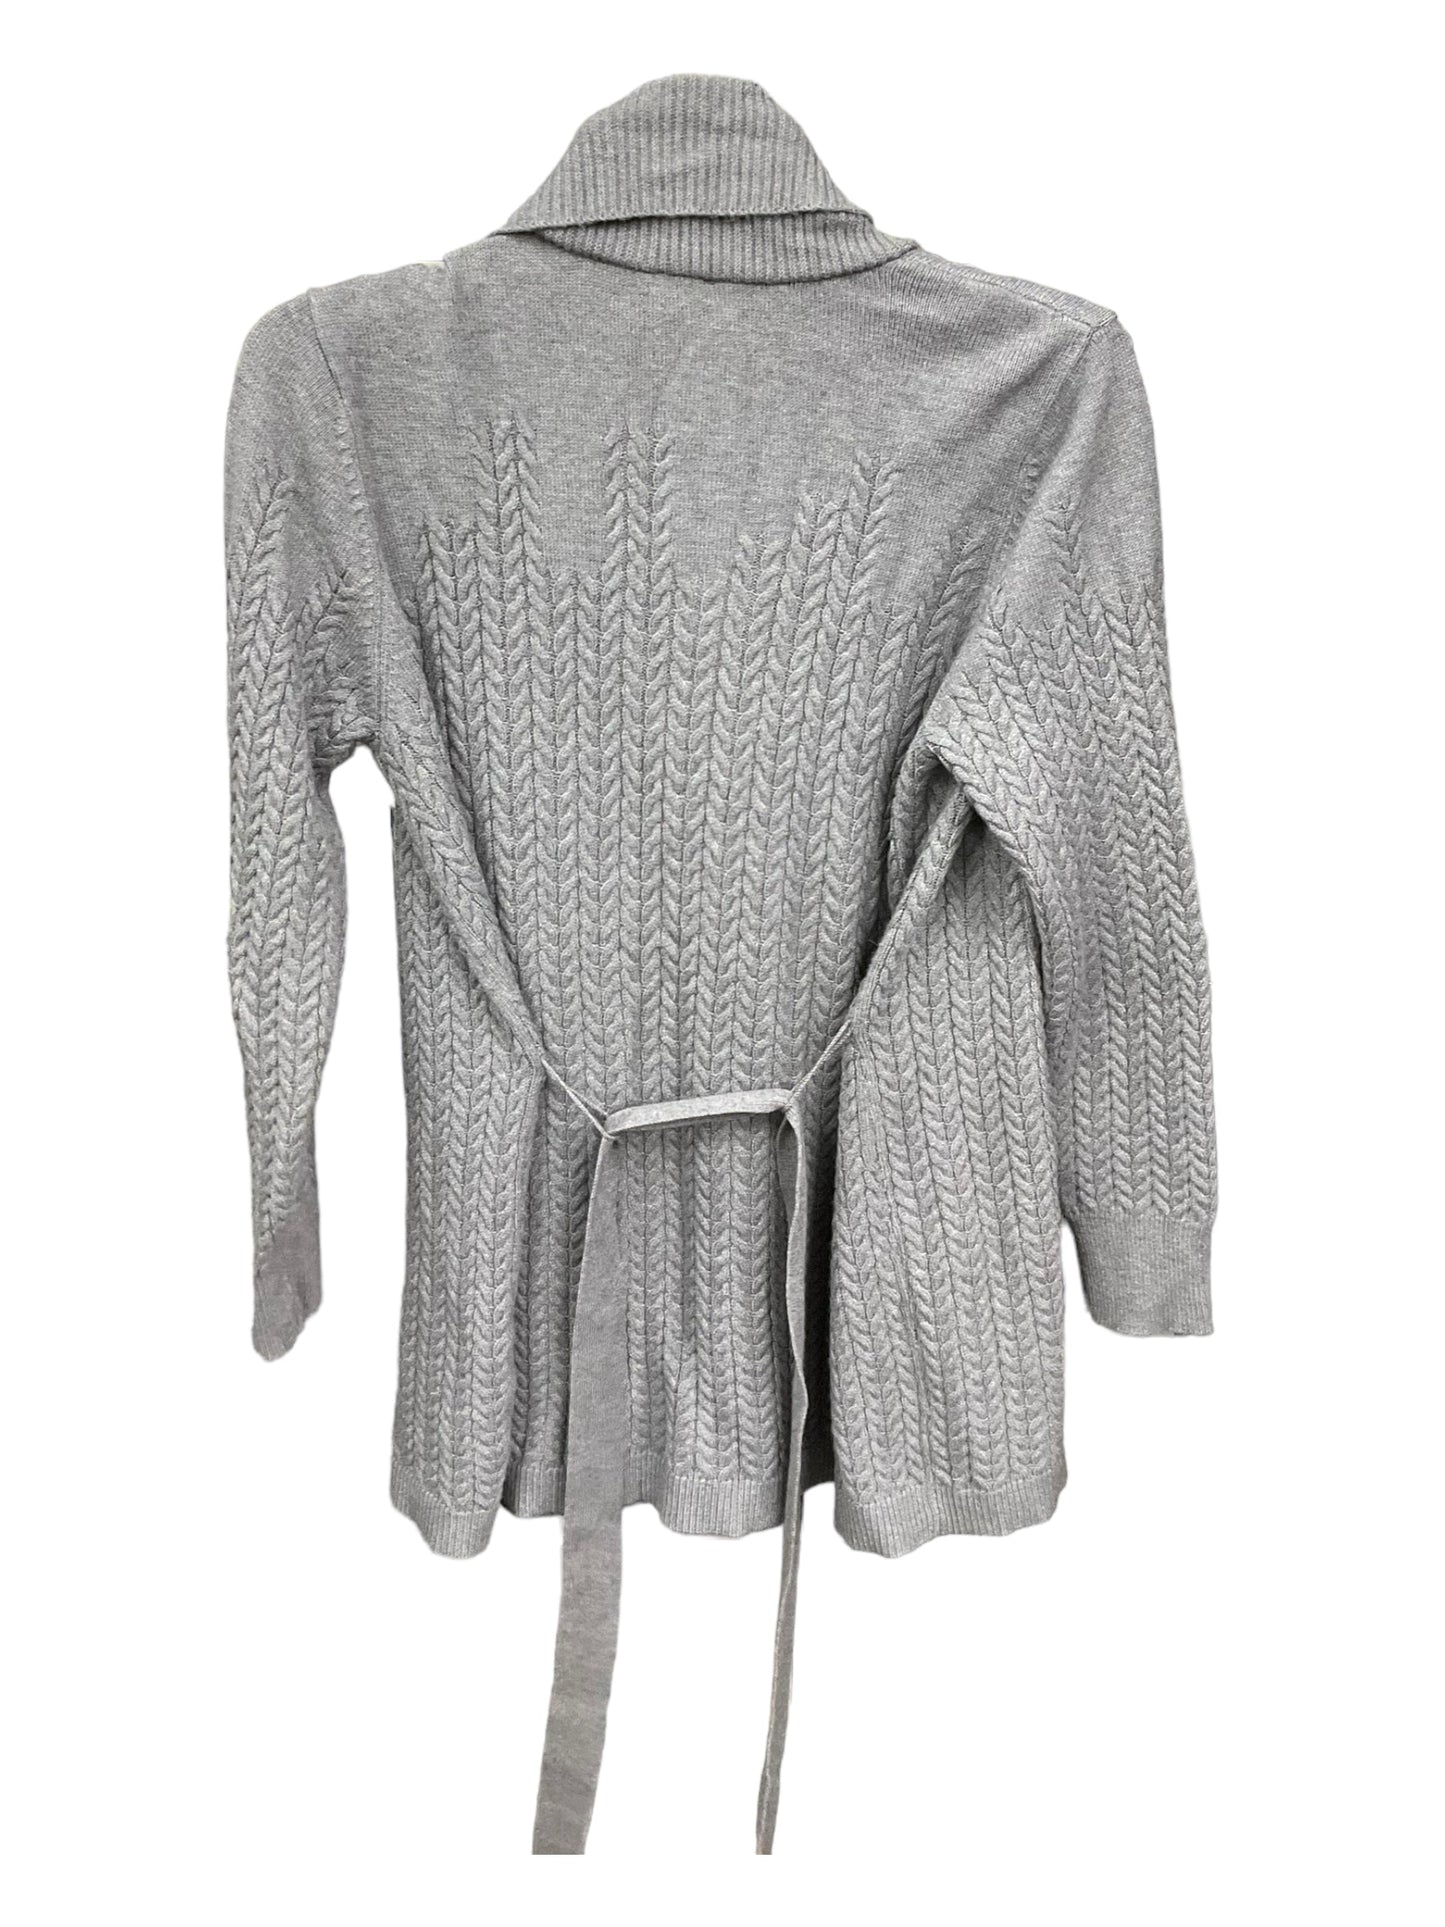 Sweater Cardigan By Chicos  Size: S